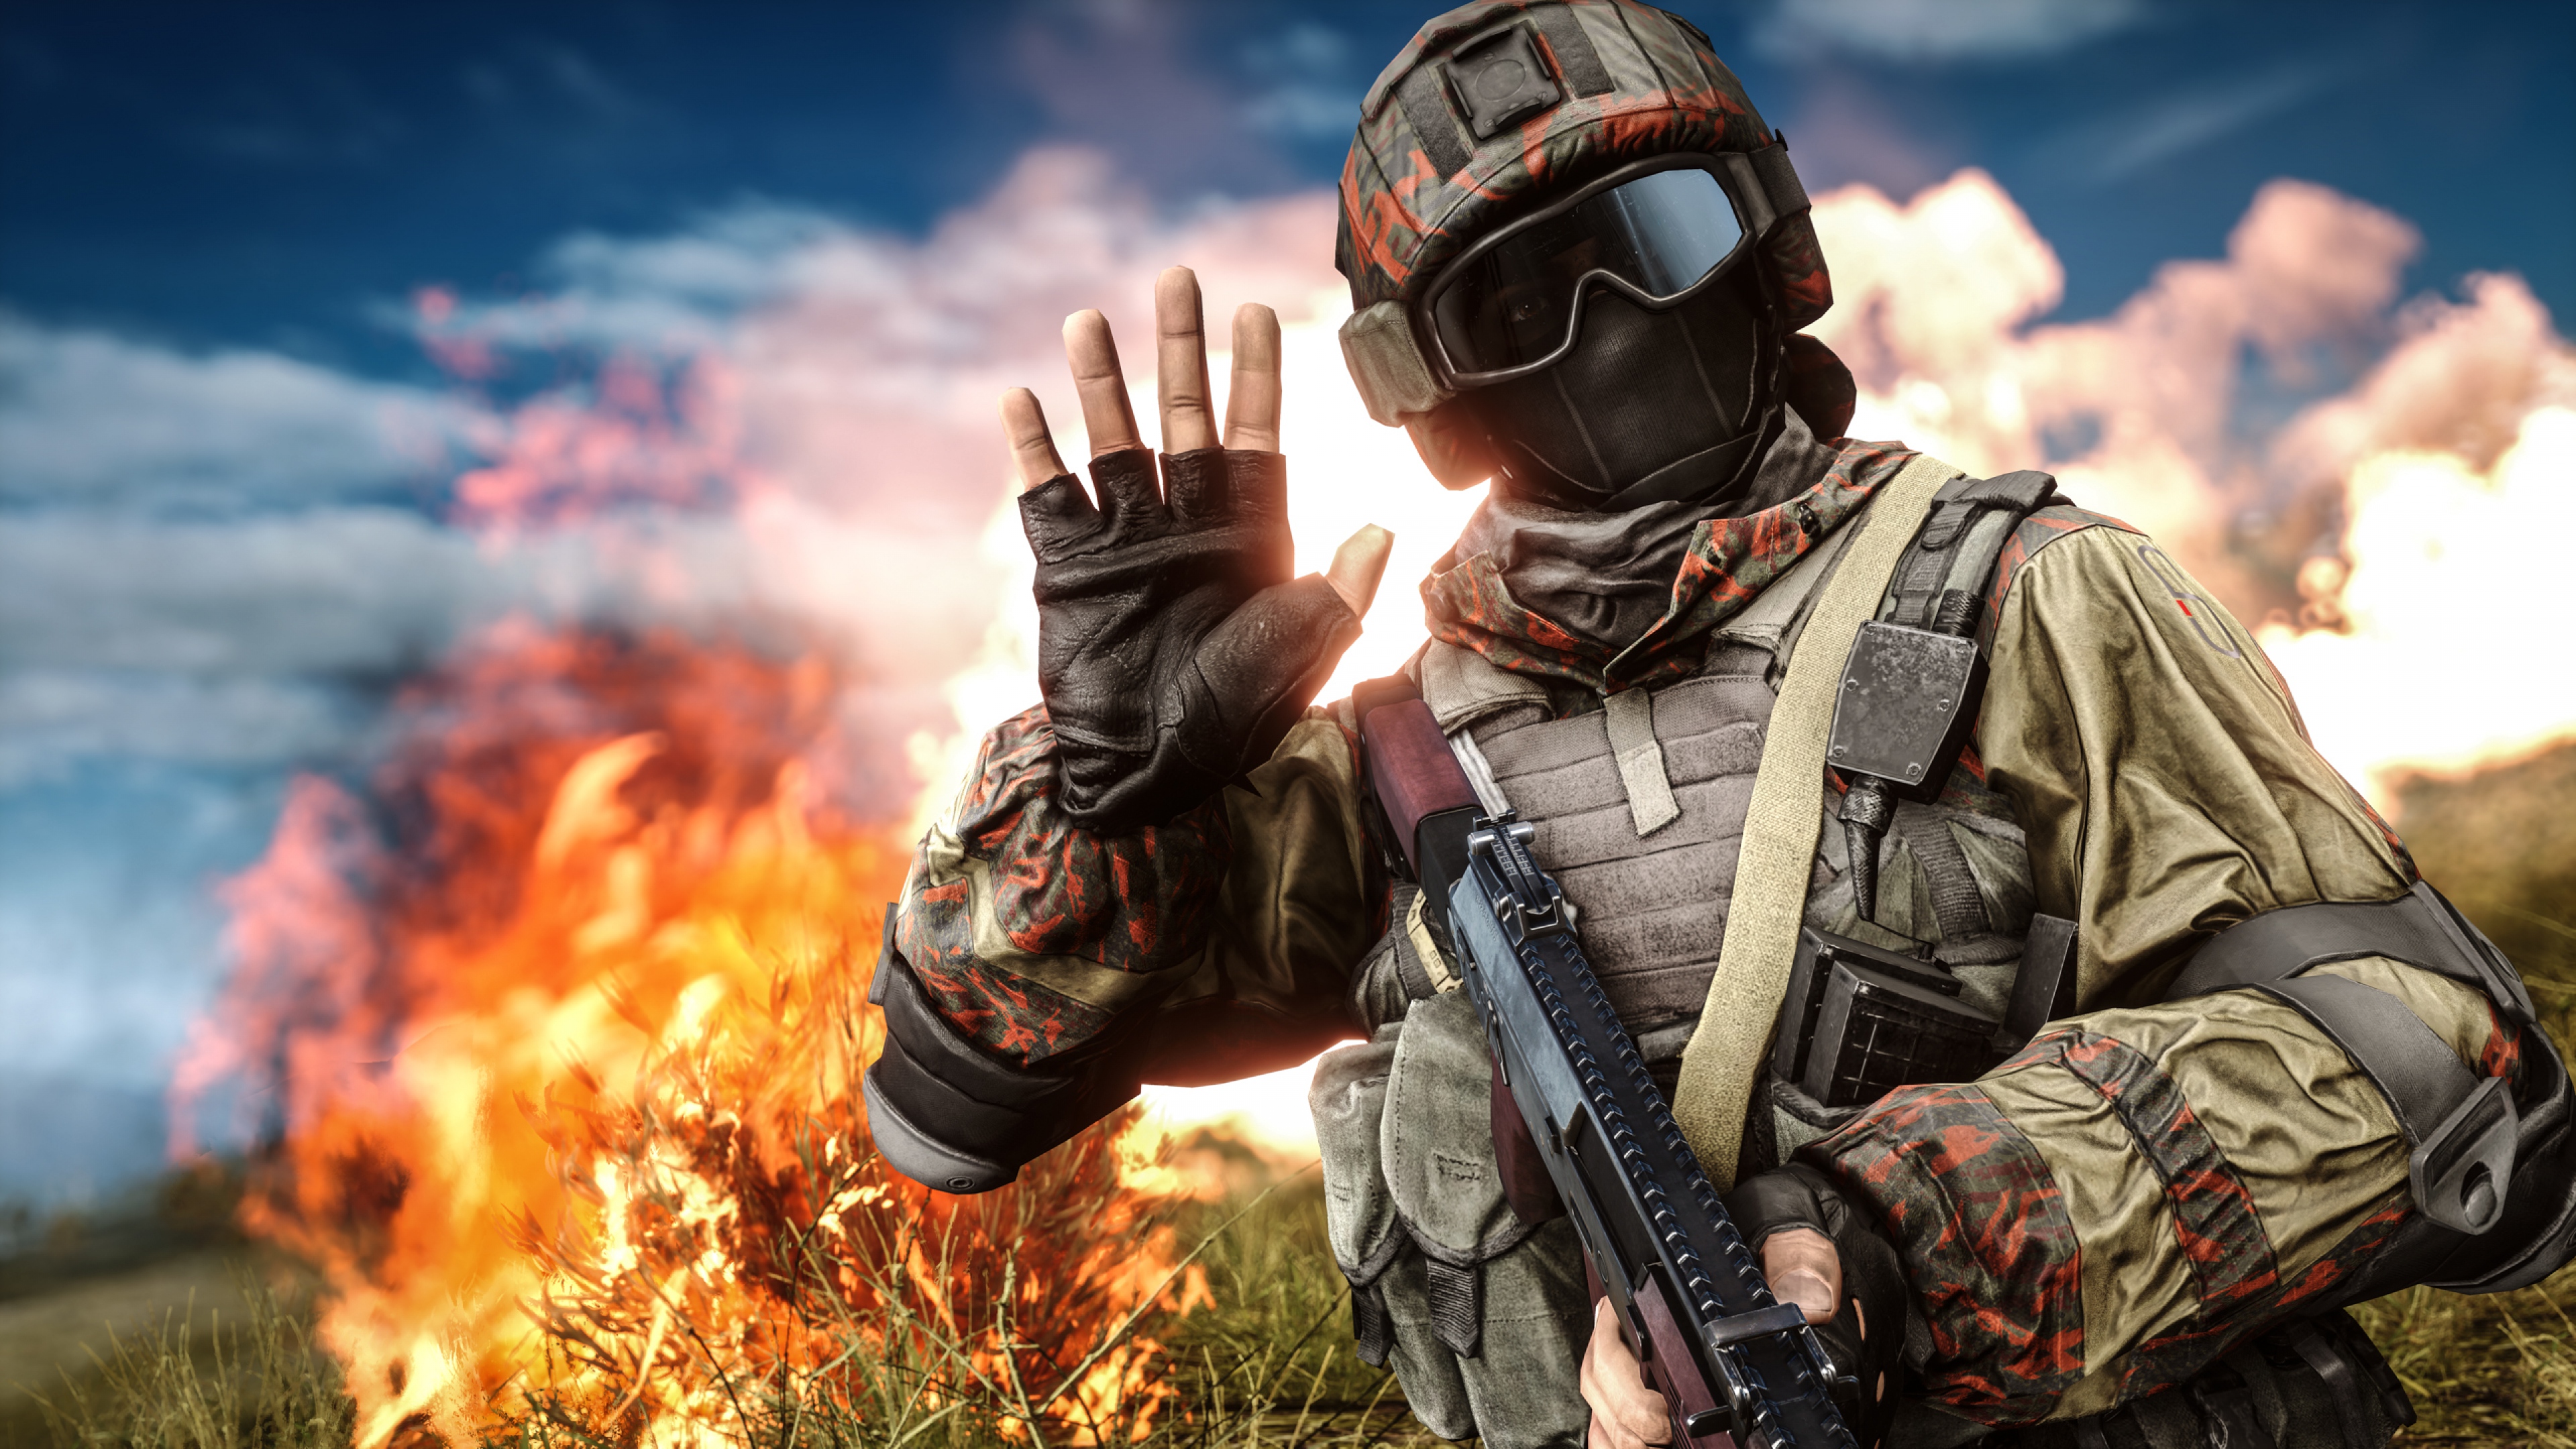 Battlefield 4 Wallpaper Awesome Battlefield 4 Pictures